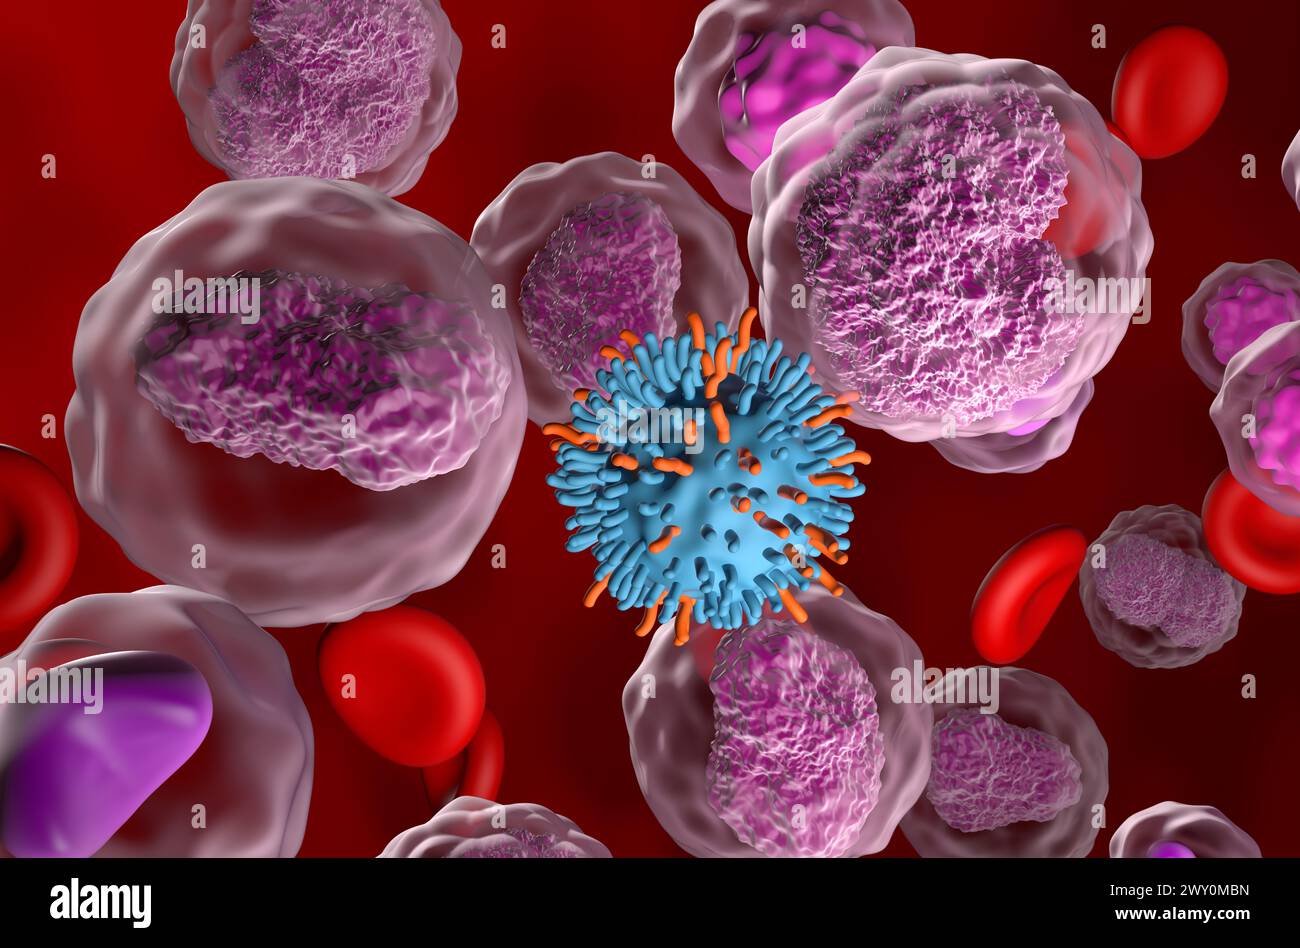 CAR T cell therapy in Non-hodgkin lymphoma (NHL) - closeup view 3d illustration Stock Photo